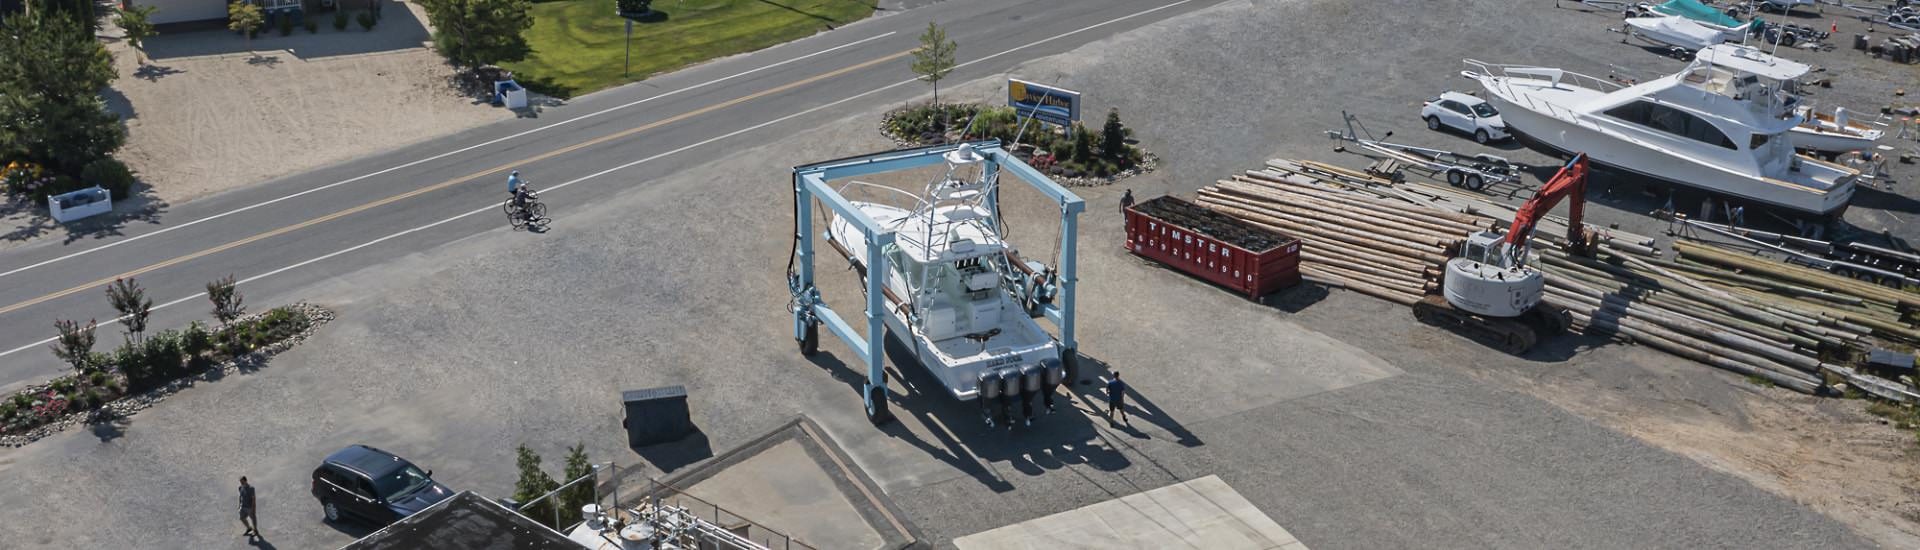 Aerial view of a boat out of the water being moved for service